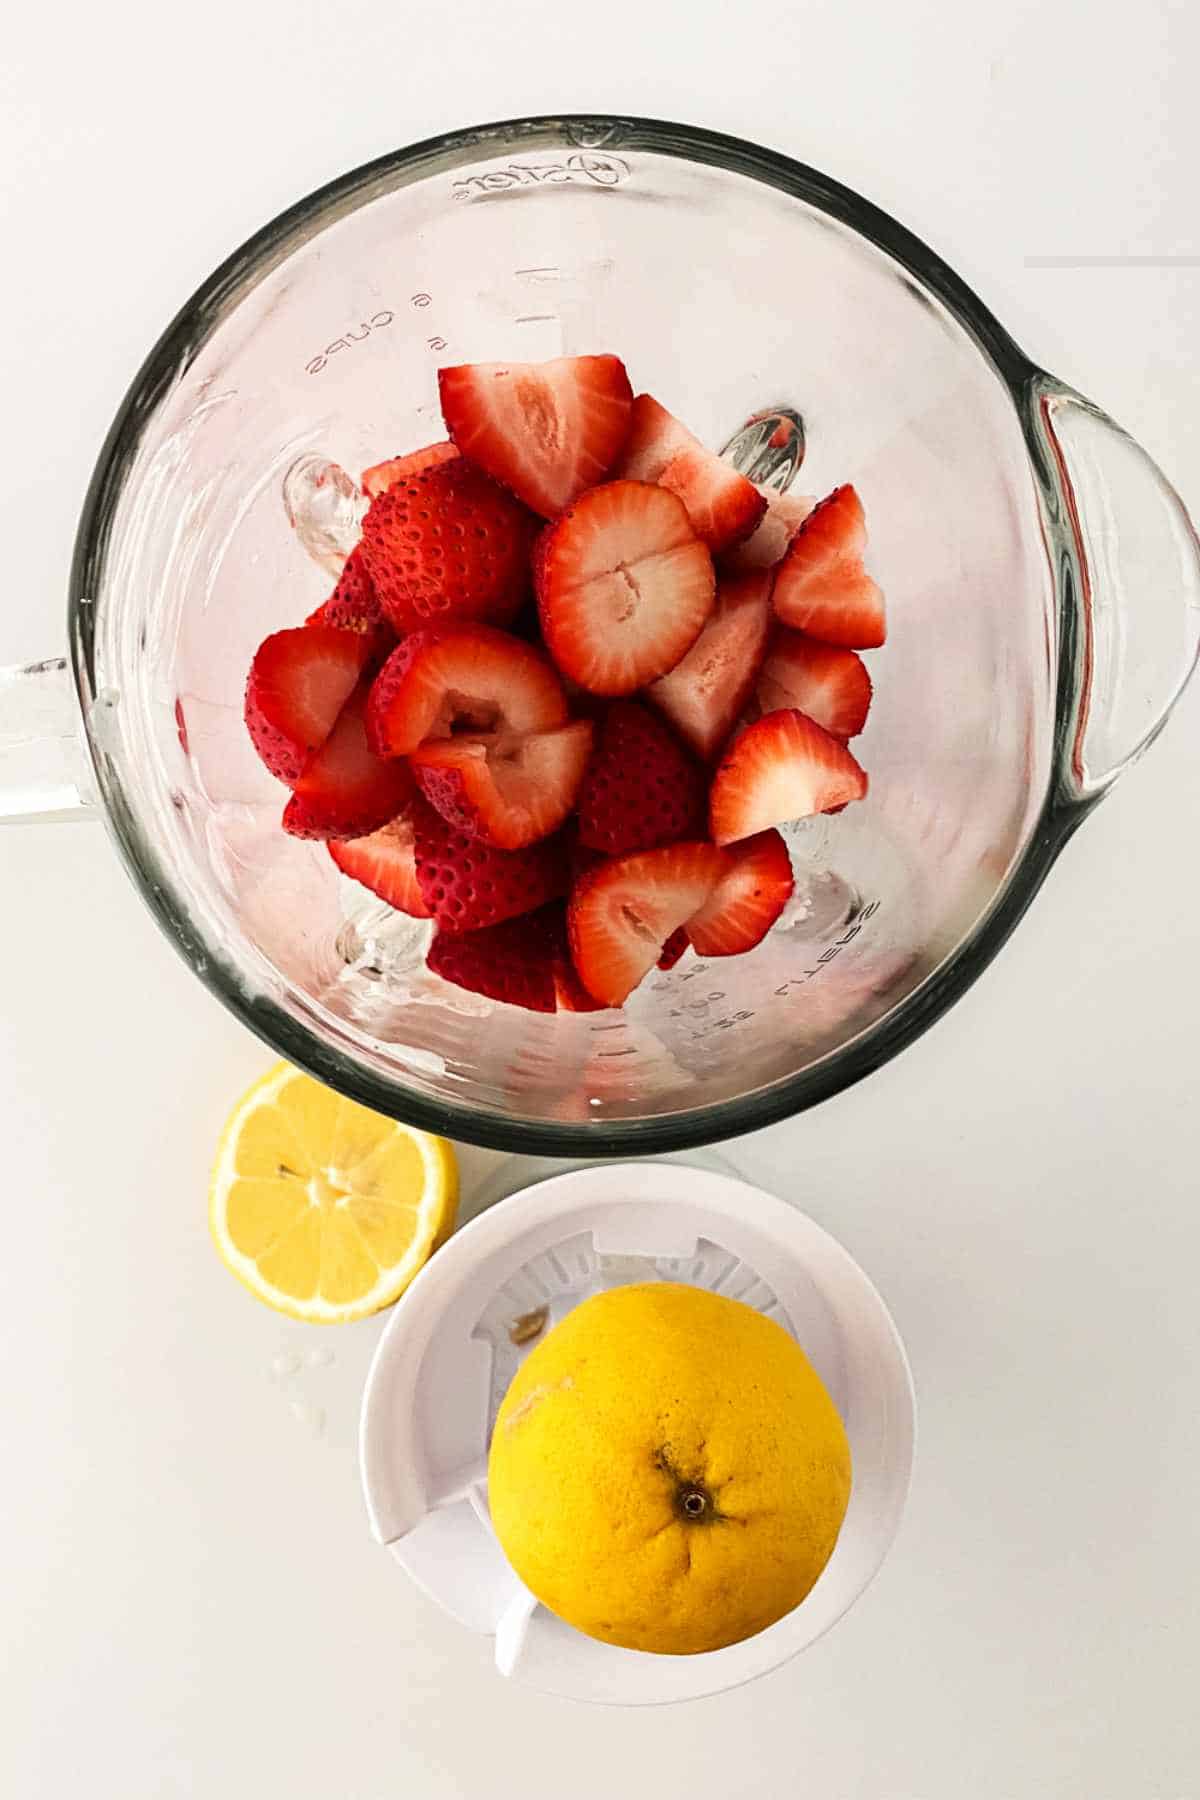 blender with berries and a squeezed lemon nearby.